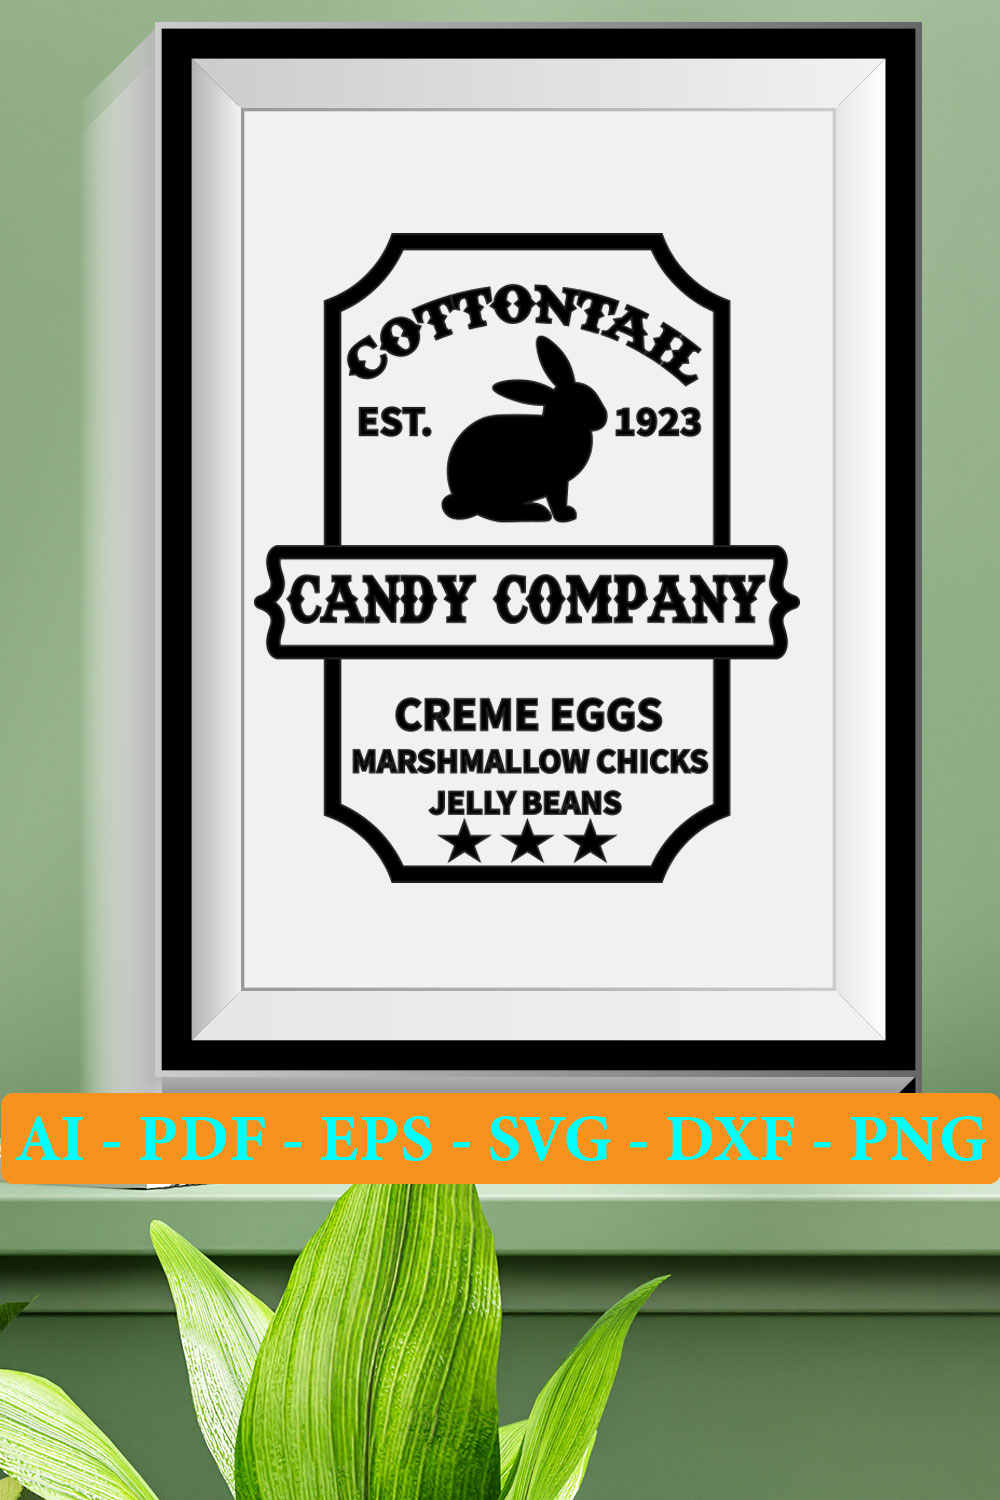 Picture of a sign for a candy company.